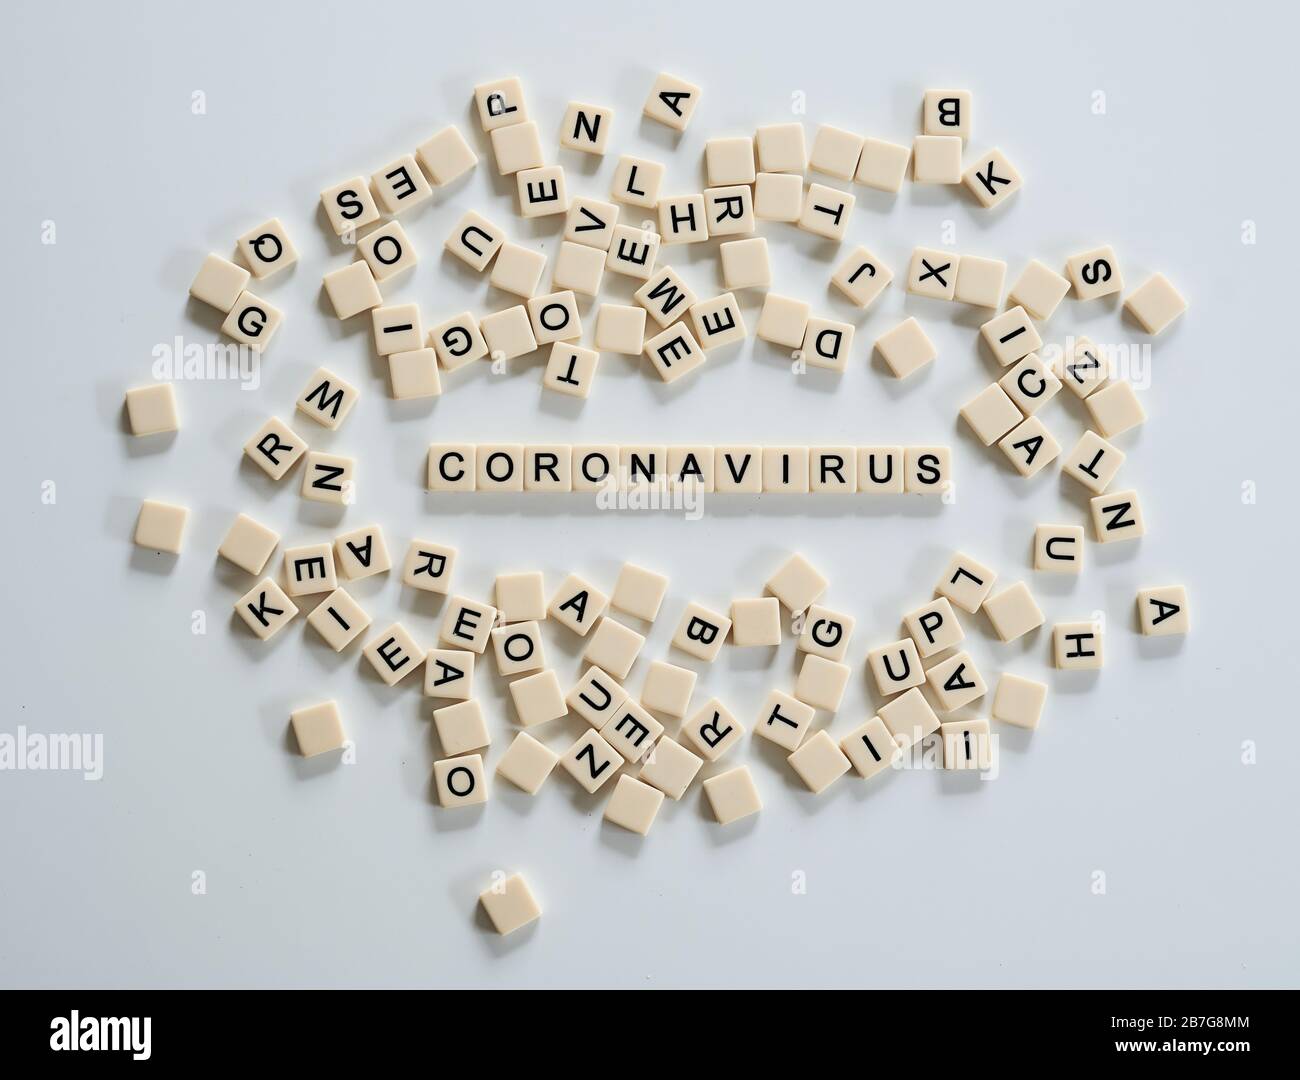 Coronavirus covid19 spelt on scrabble tiles and surrounded by other tiles  Stock Photo